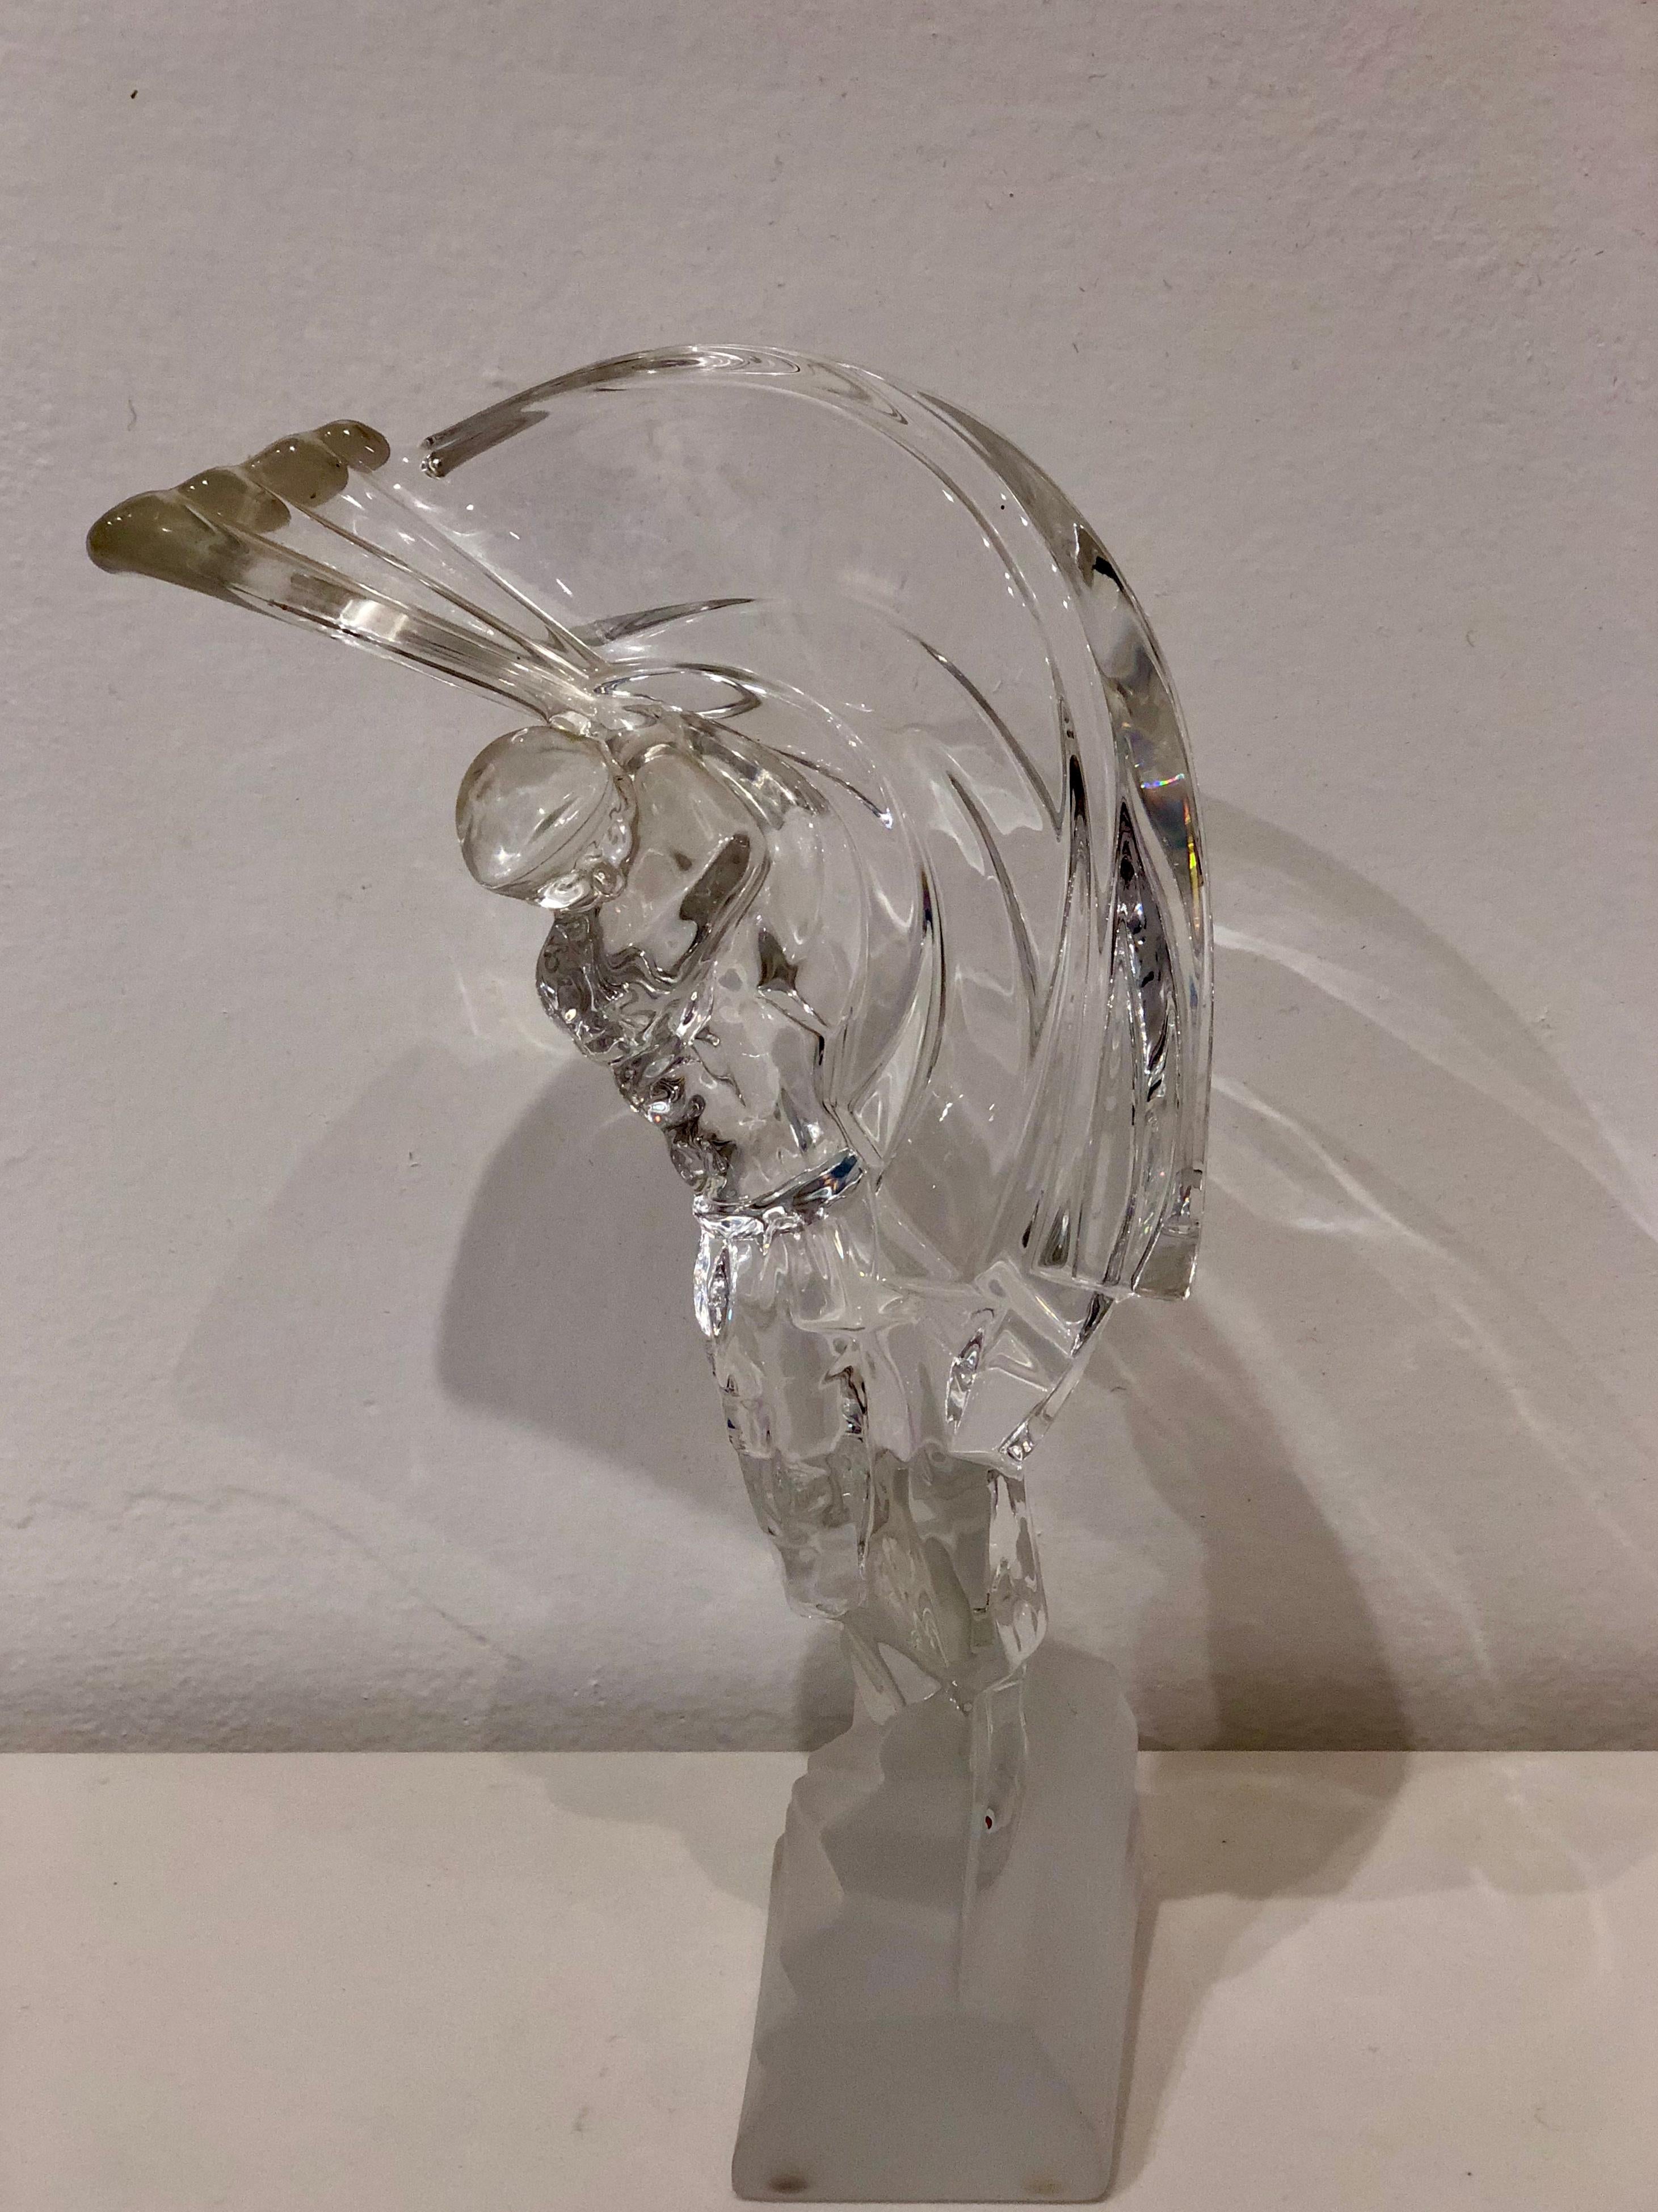 Beautiful crystal sculpture of golfer swinging his arm with frosted base, reminance of Lalique pieces, made in France, circa 1970s by Sevres crystal France , great condition no chips cracks or scratches ,signed and stamped, perfect gift for any golf